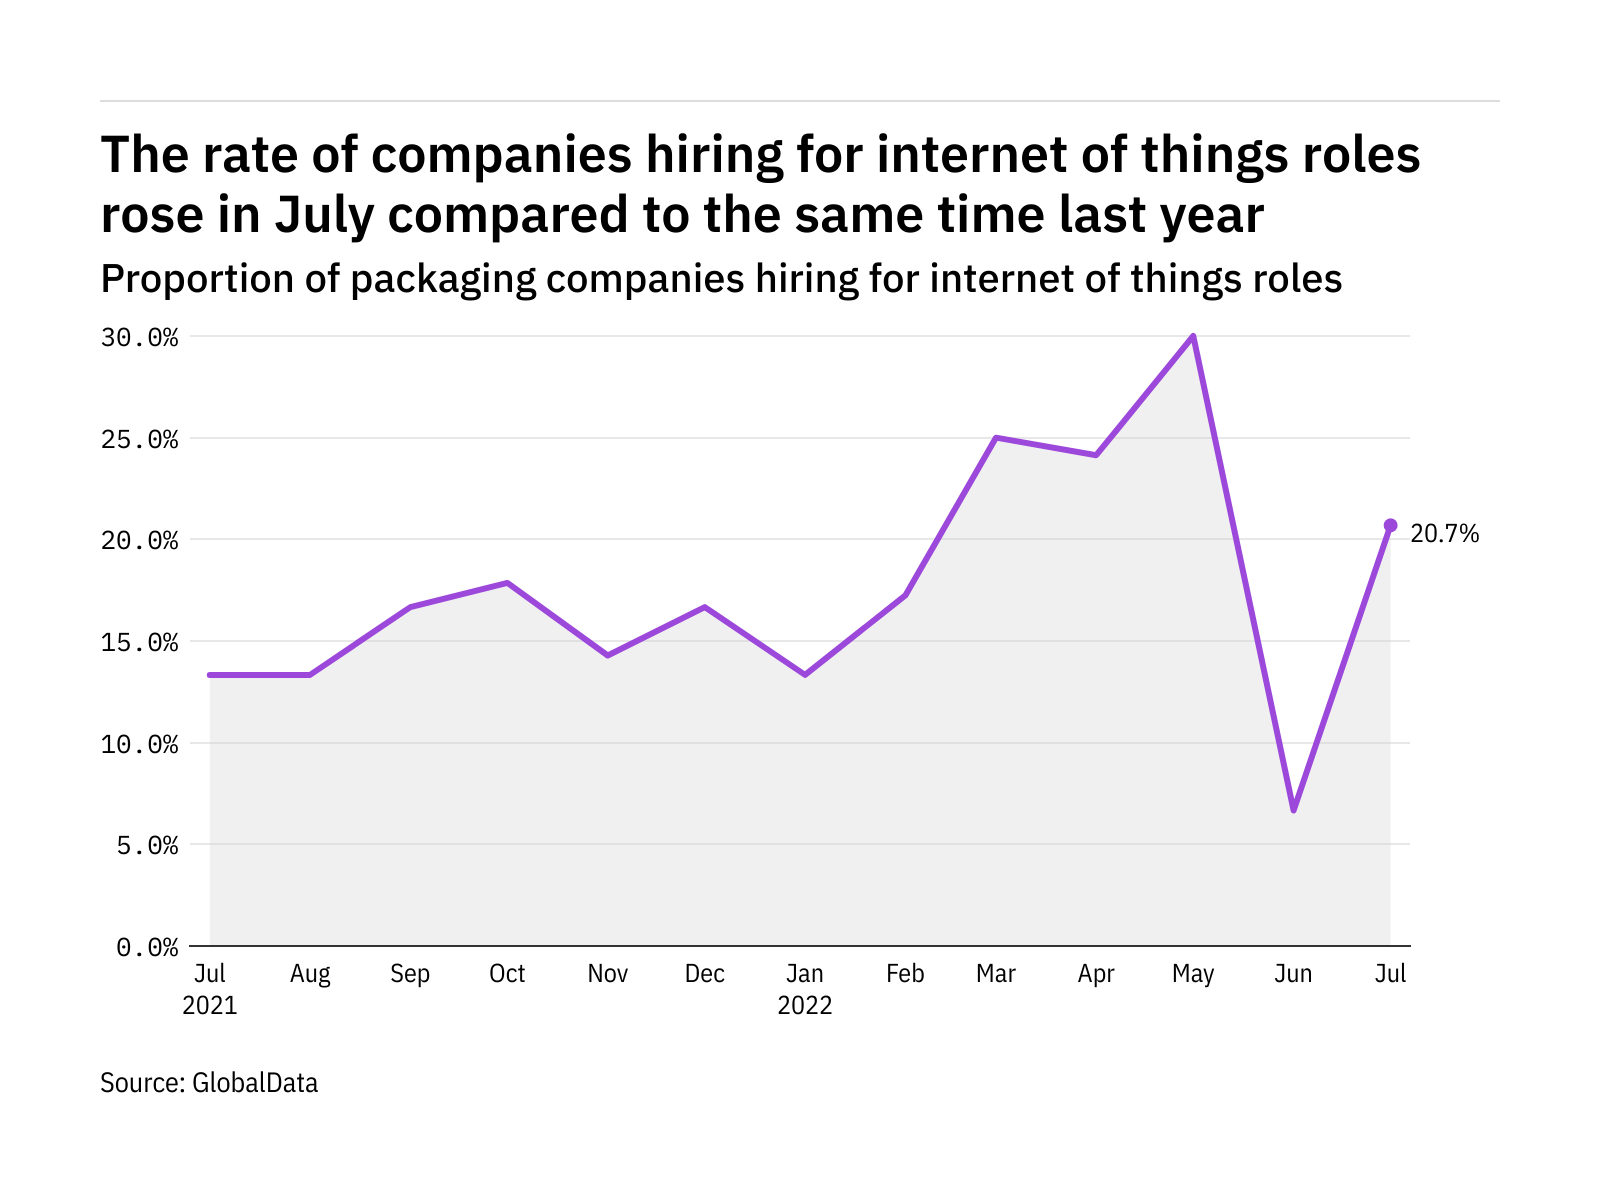 Internet of things hiring levels in the packaging industry rose in July 2022